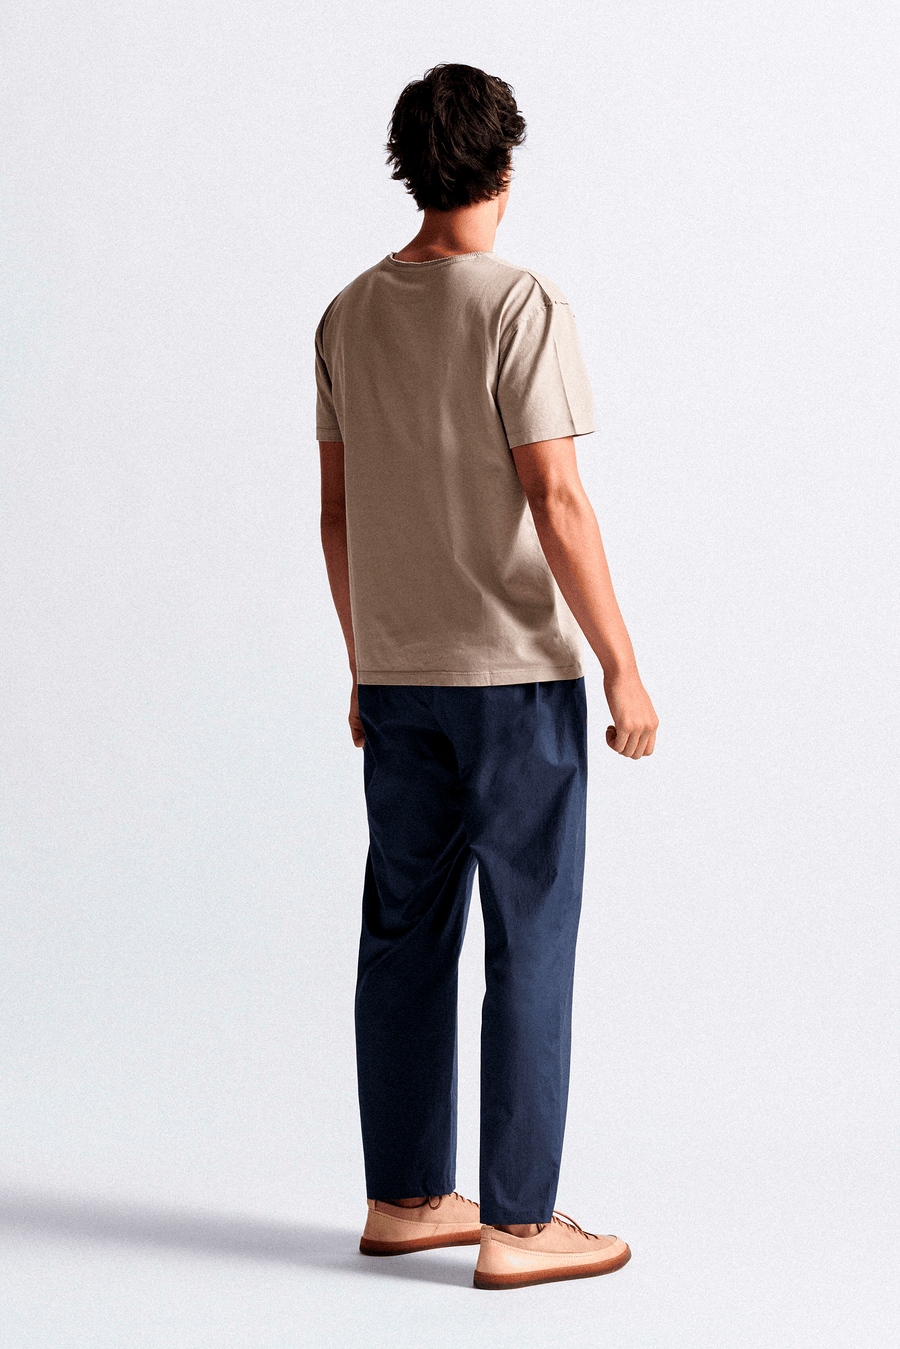 Trousers - Blue